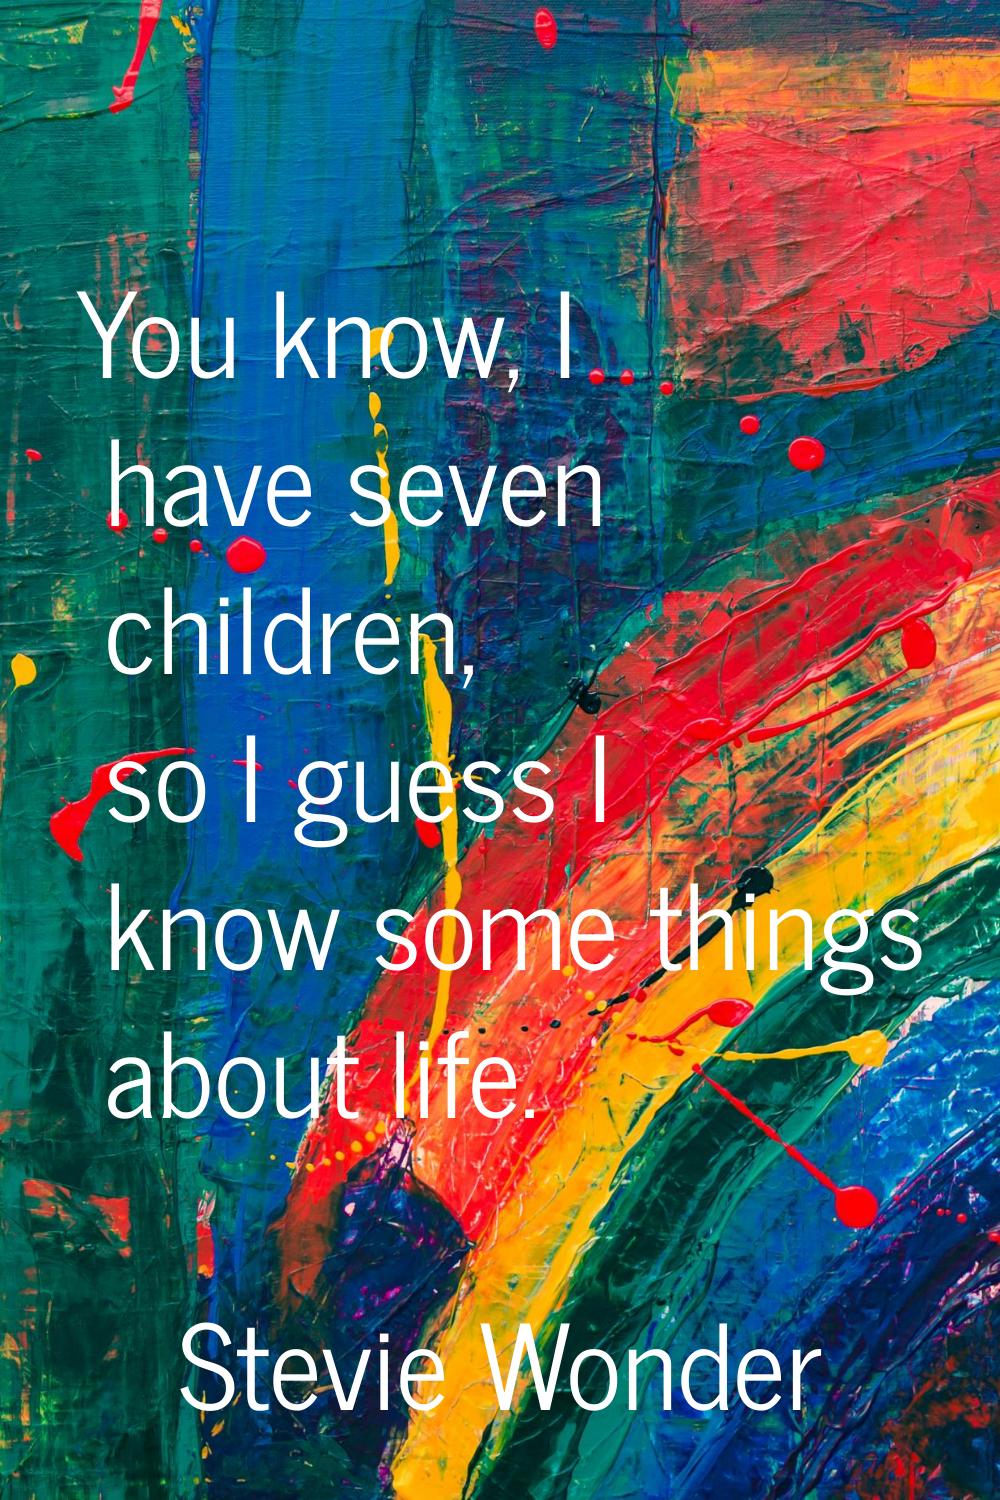 You know, I have seven children, so I guess I know some things about life.